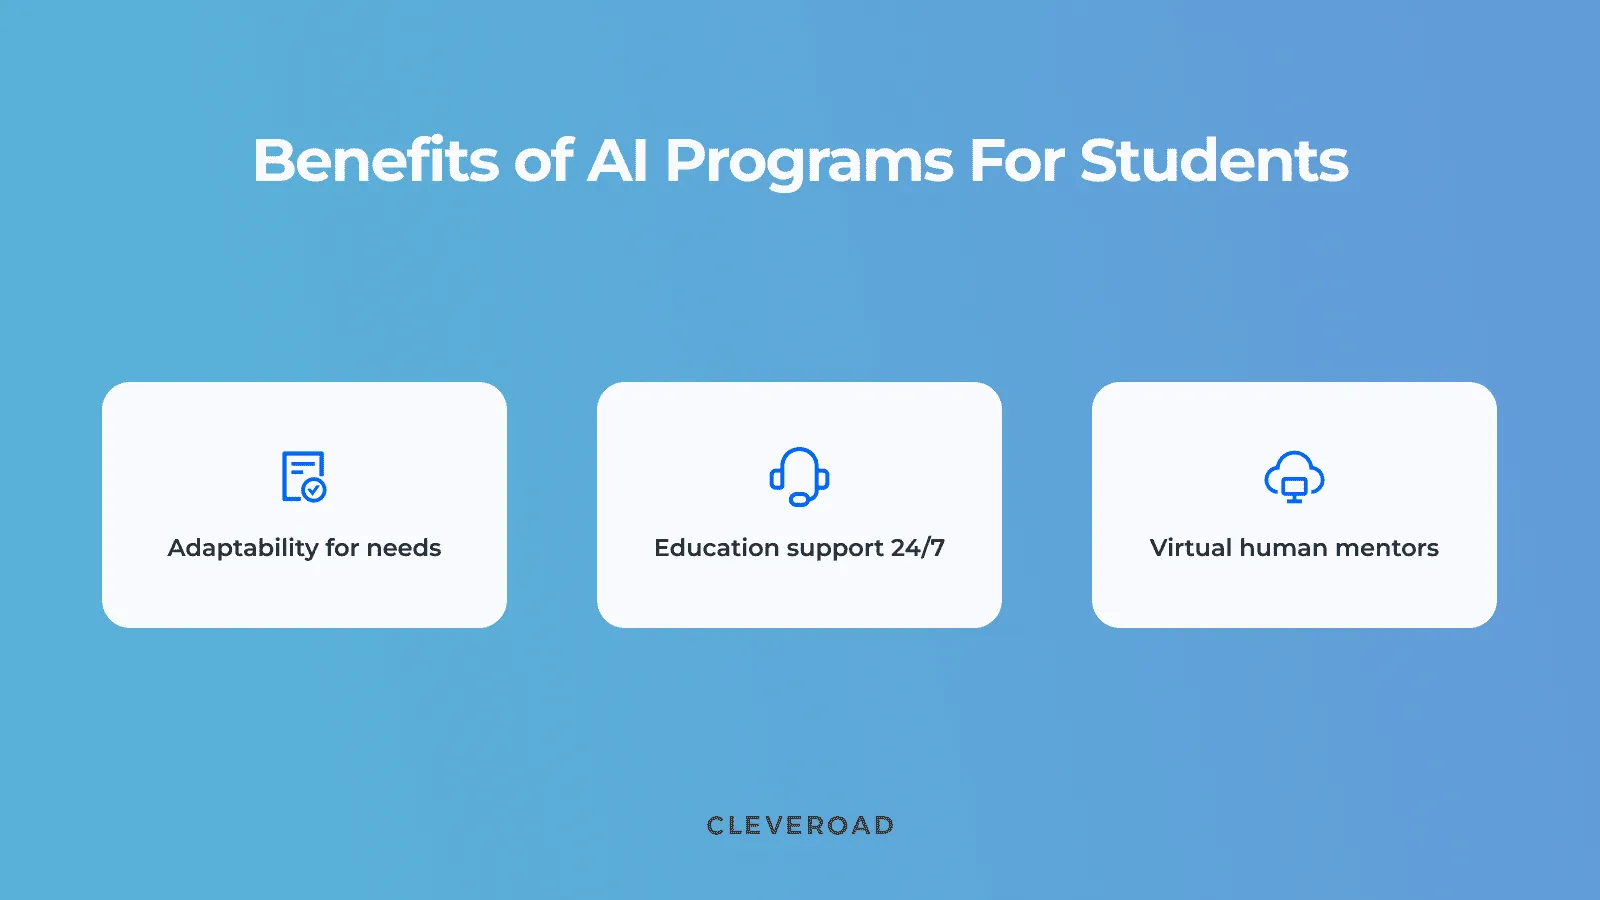 Benefits of AI programs for students